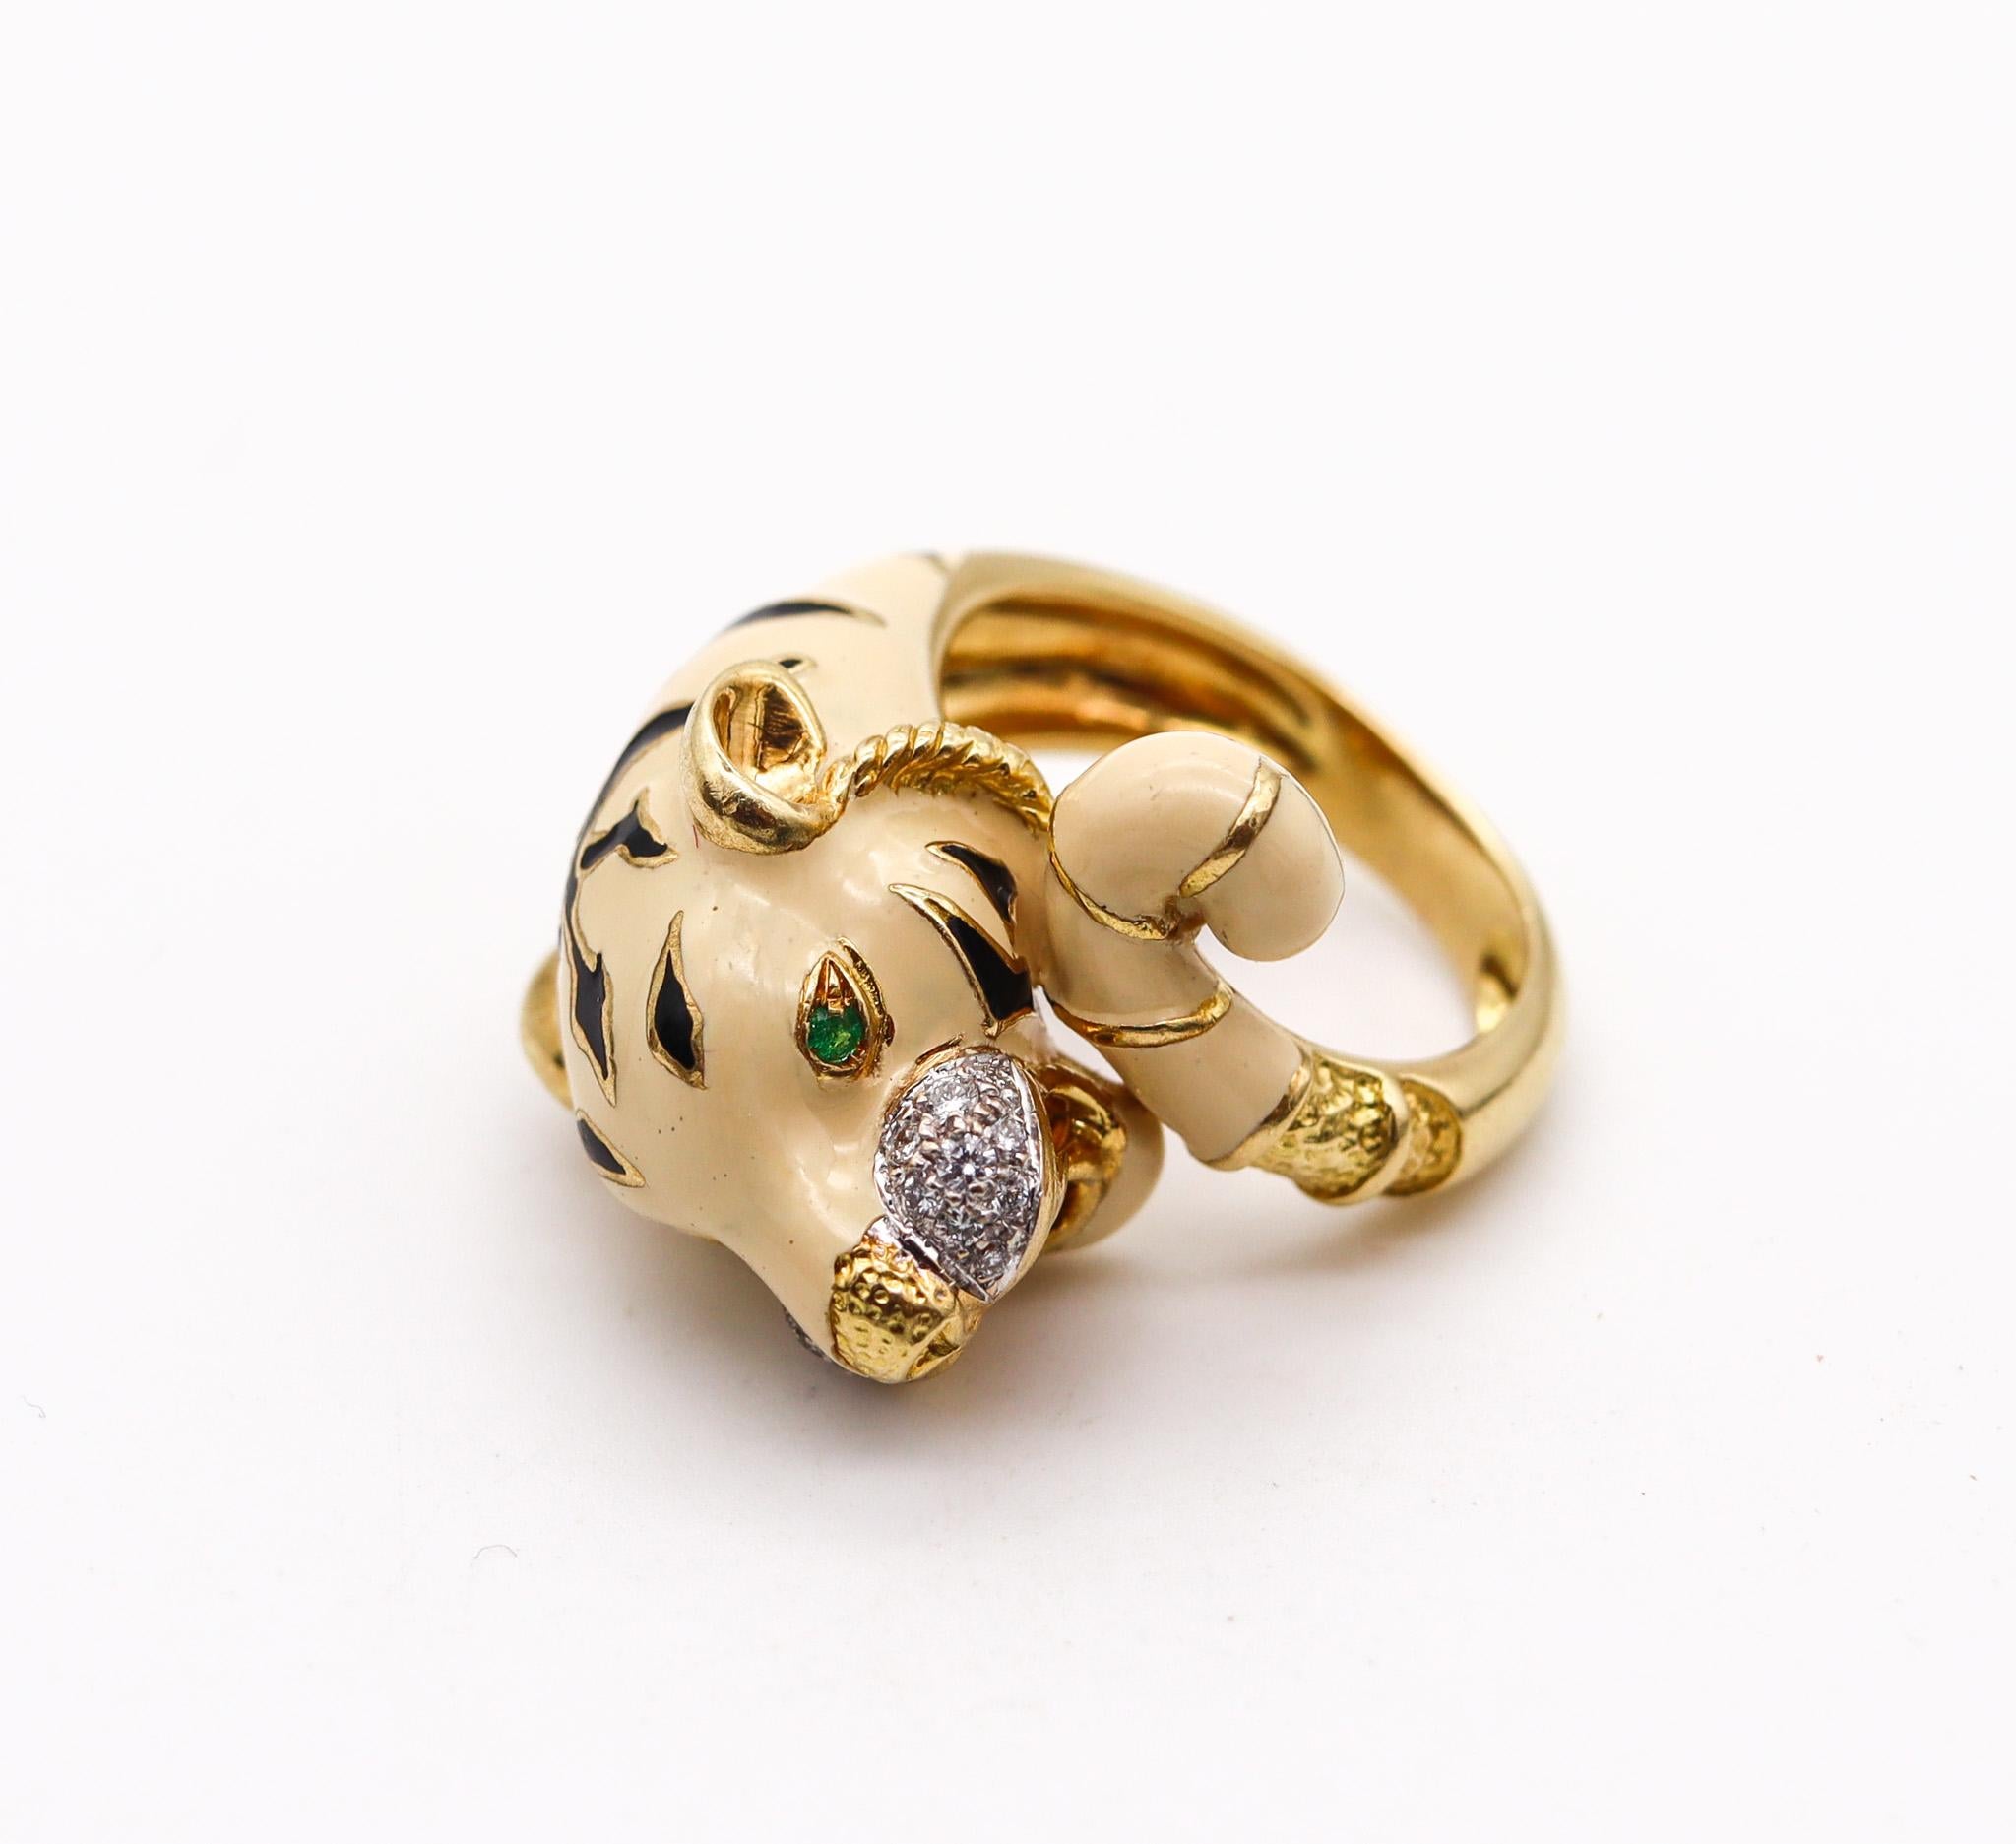 Roberto Legnazzi Enameled Tiger Ring In 18Kt Gold With Diamonds And Emeralds In Excellent Condition For Sale In Miami, FL